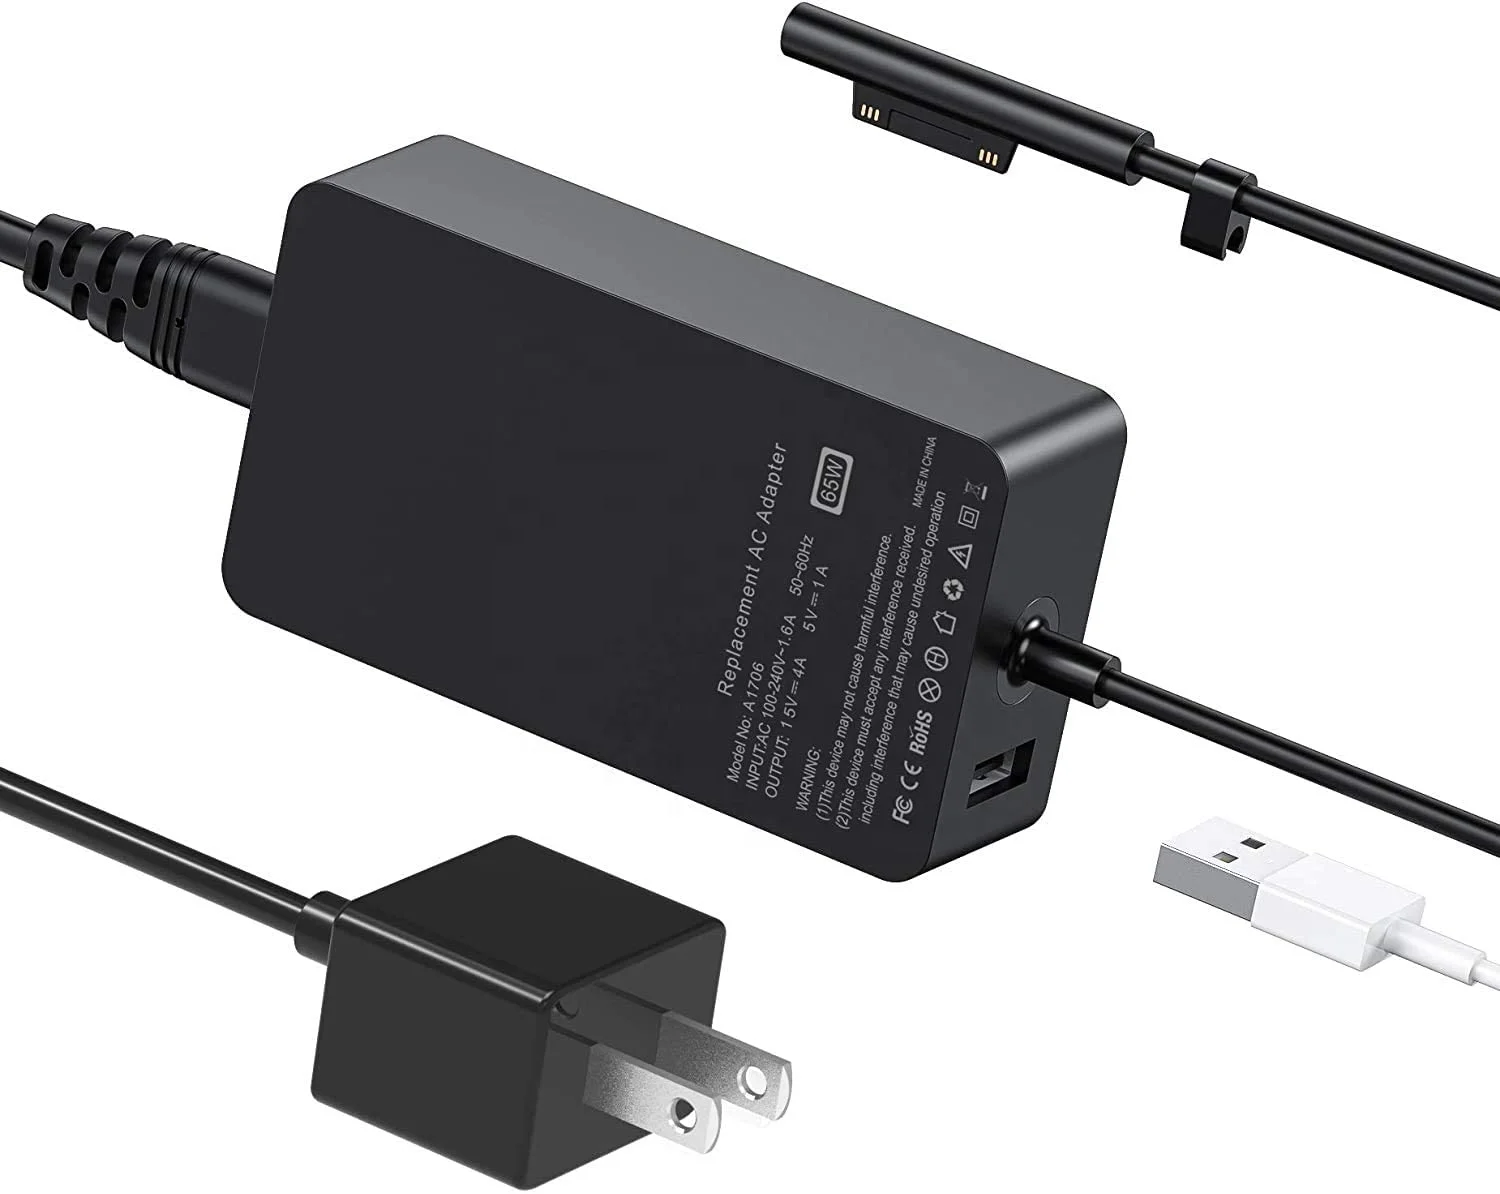 

Amazon hot 36W 44W 65W 12V/15V 2.58a Computer Charger laptop adapter for Microsoft Surface Pro 3/4/5 Power Supply, Black